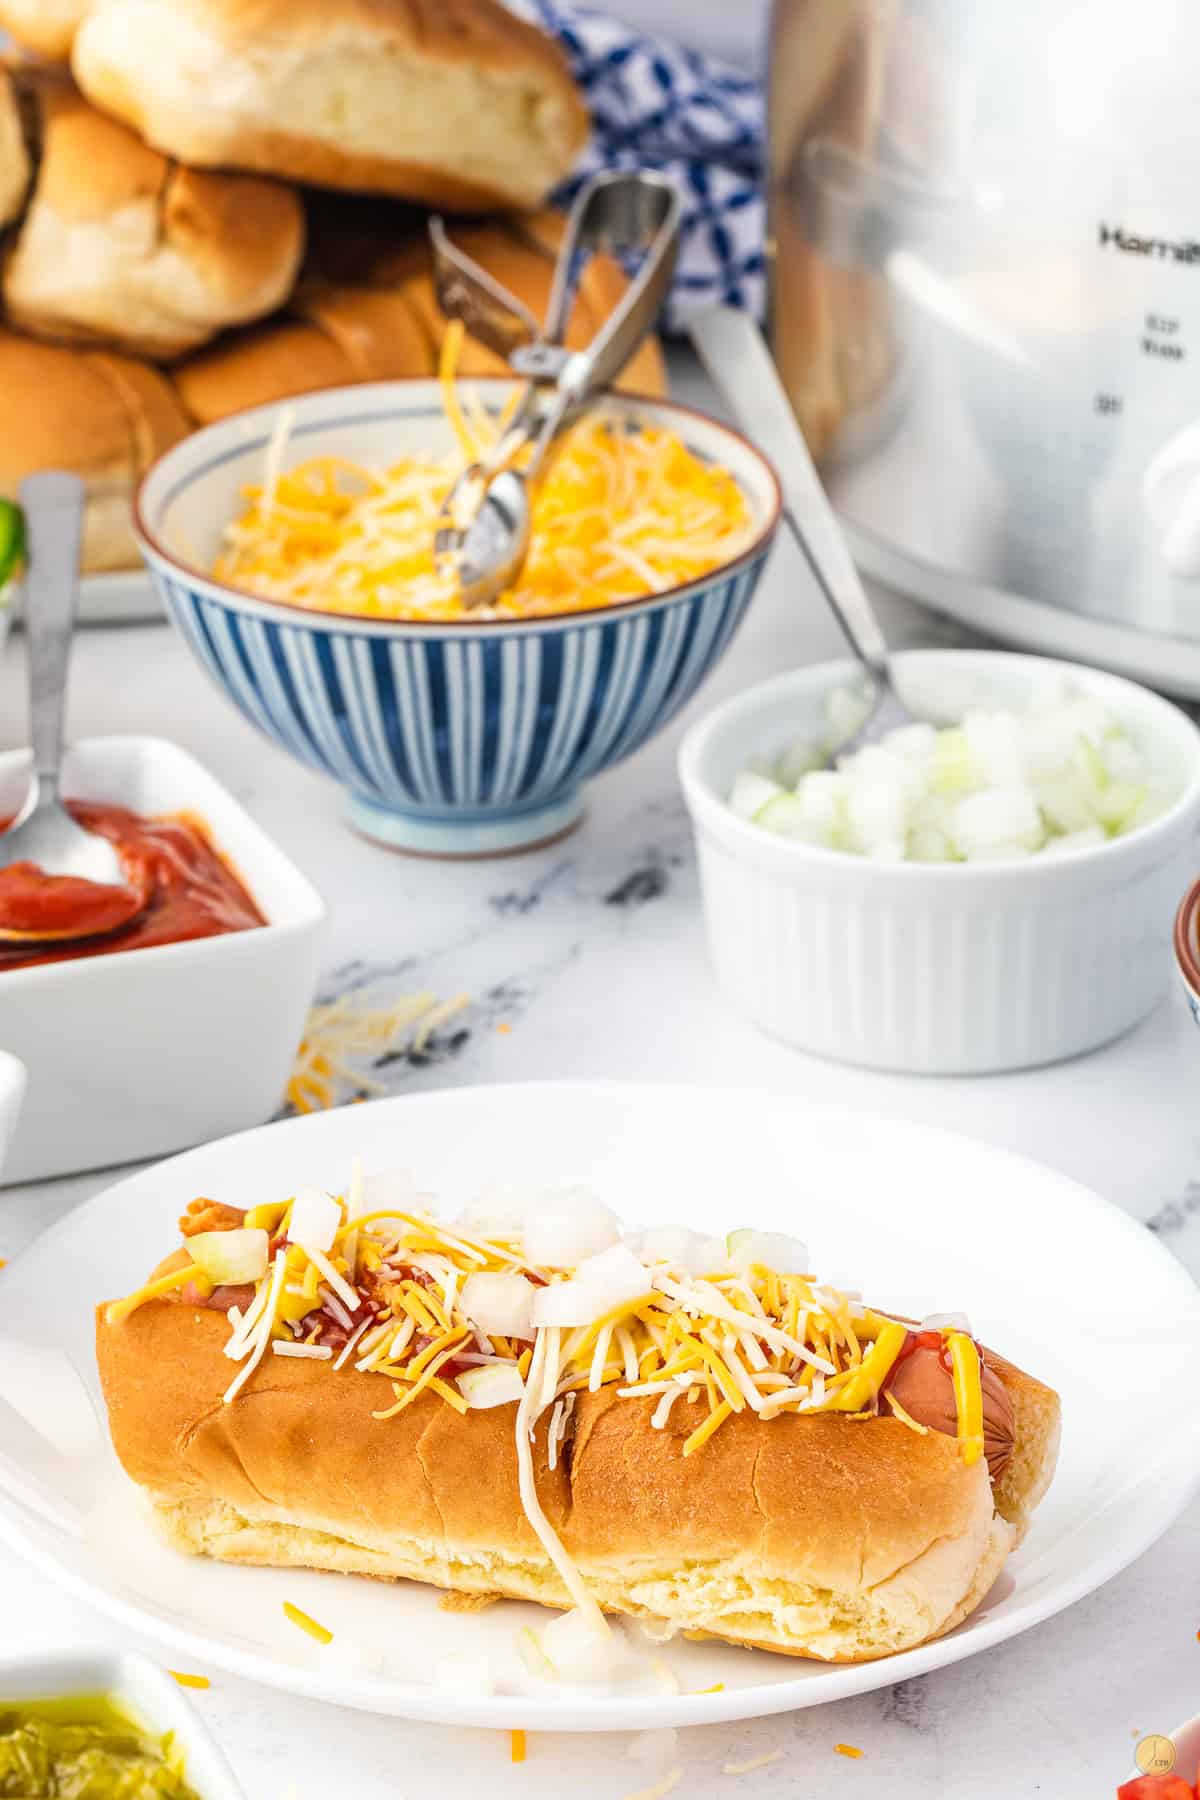 dressed hot dog on a white plate